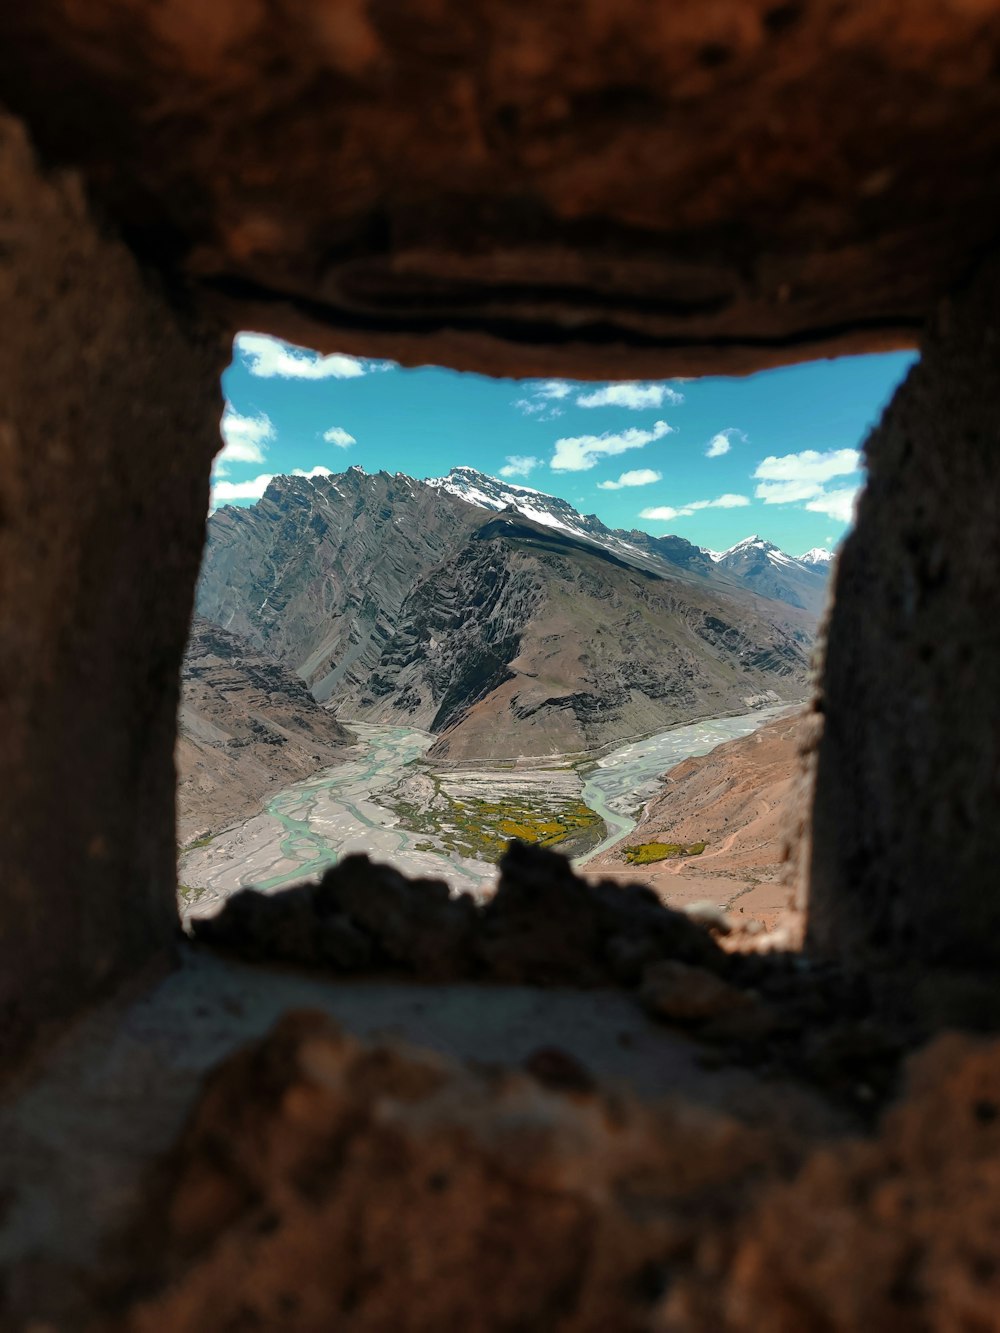 mountains and body of water through ssquare hole